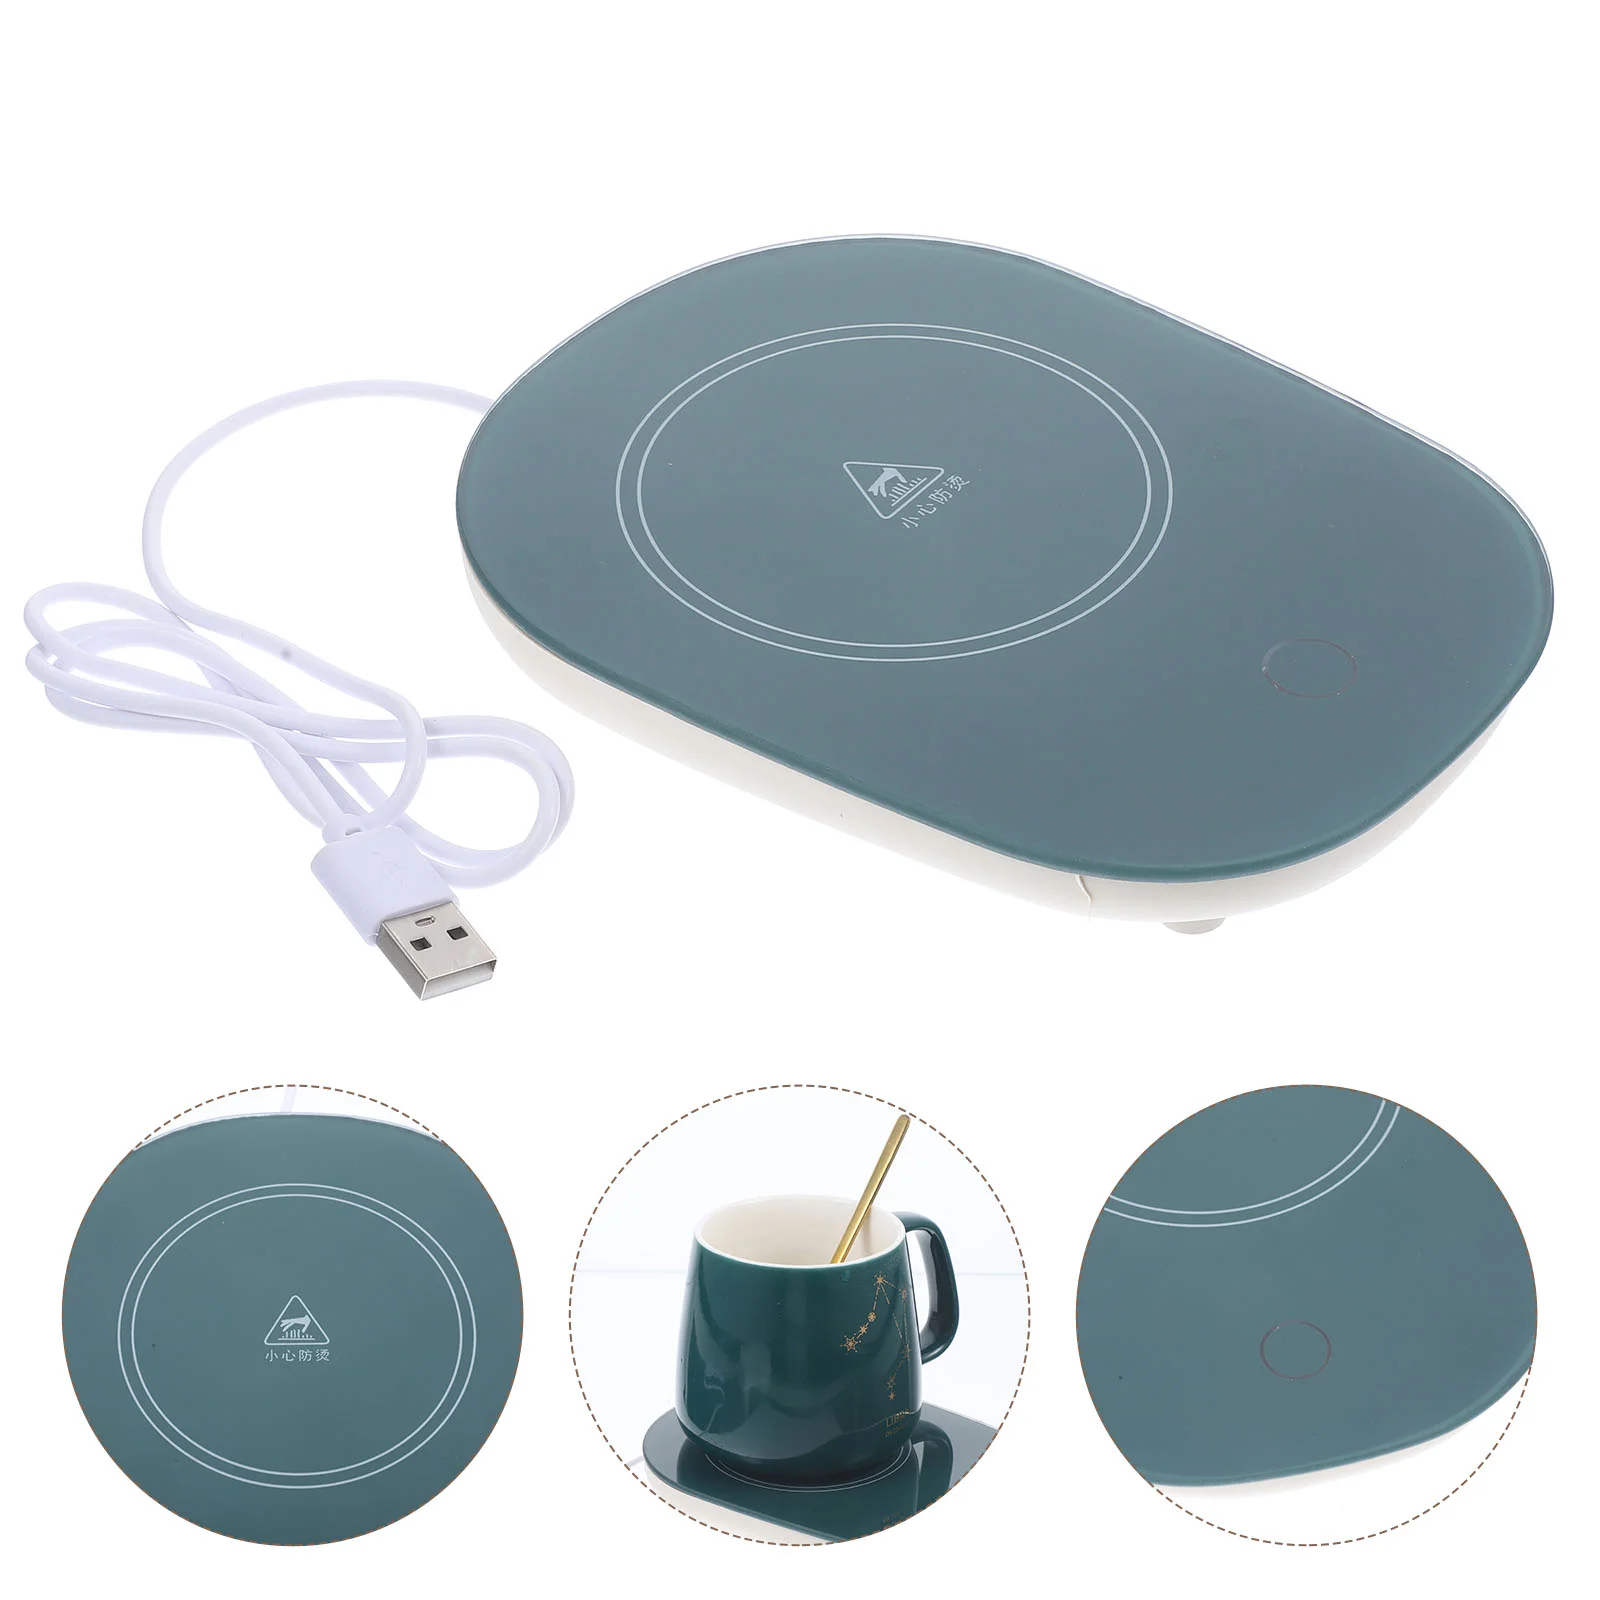 

Warmer Cup Mug Coffee Usb Desk Electric Heater Drink Plate Beverage Coaster Corded Heating Office Home Wireless Gadgets